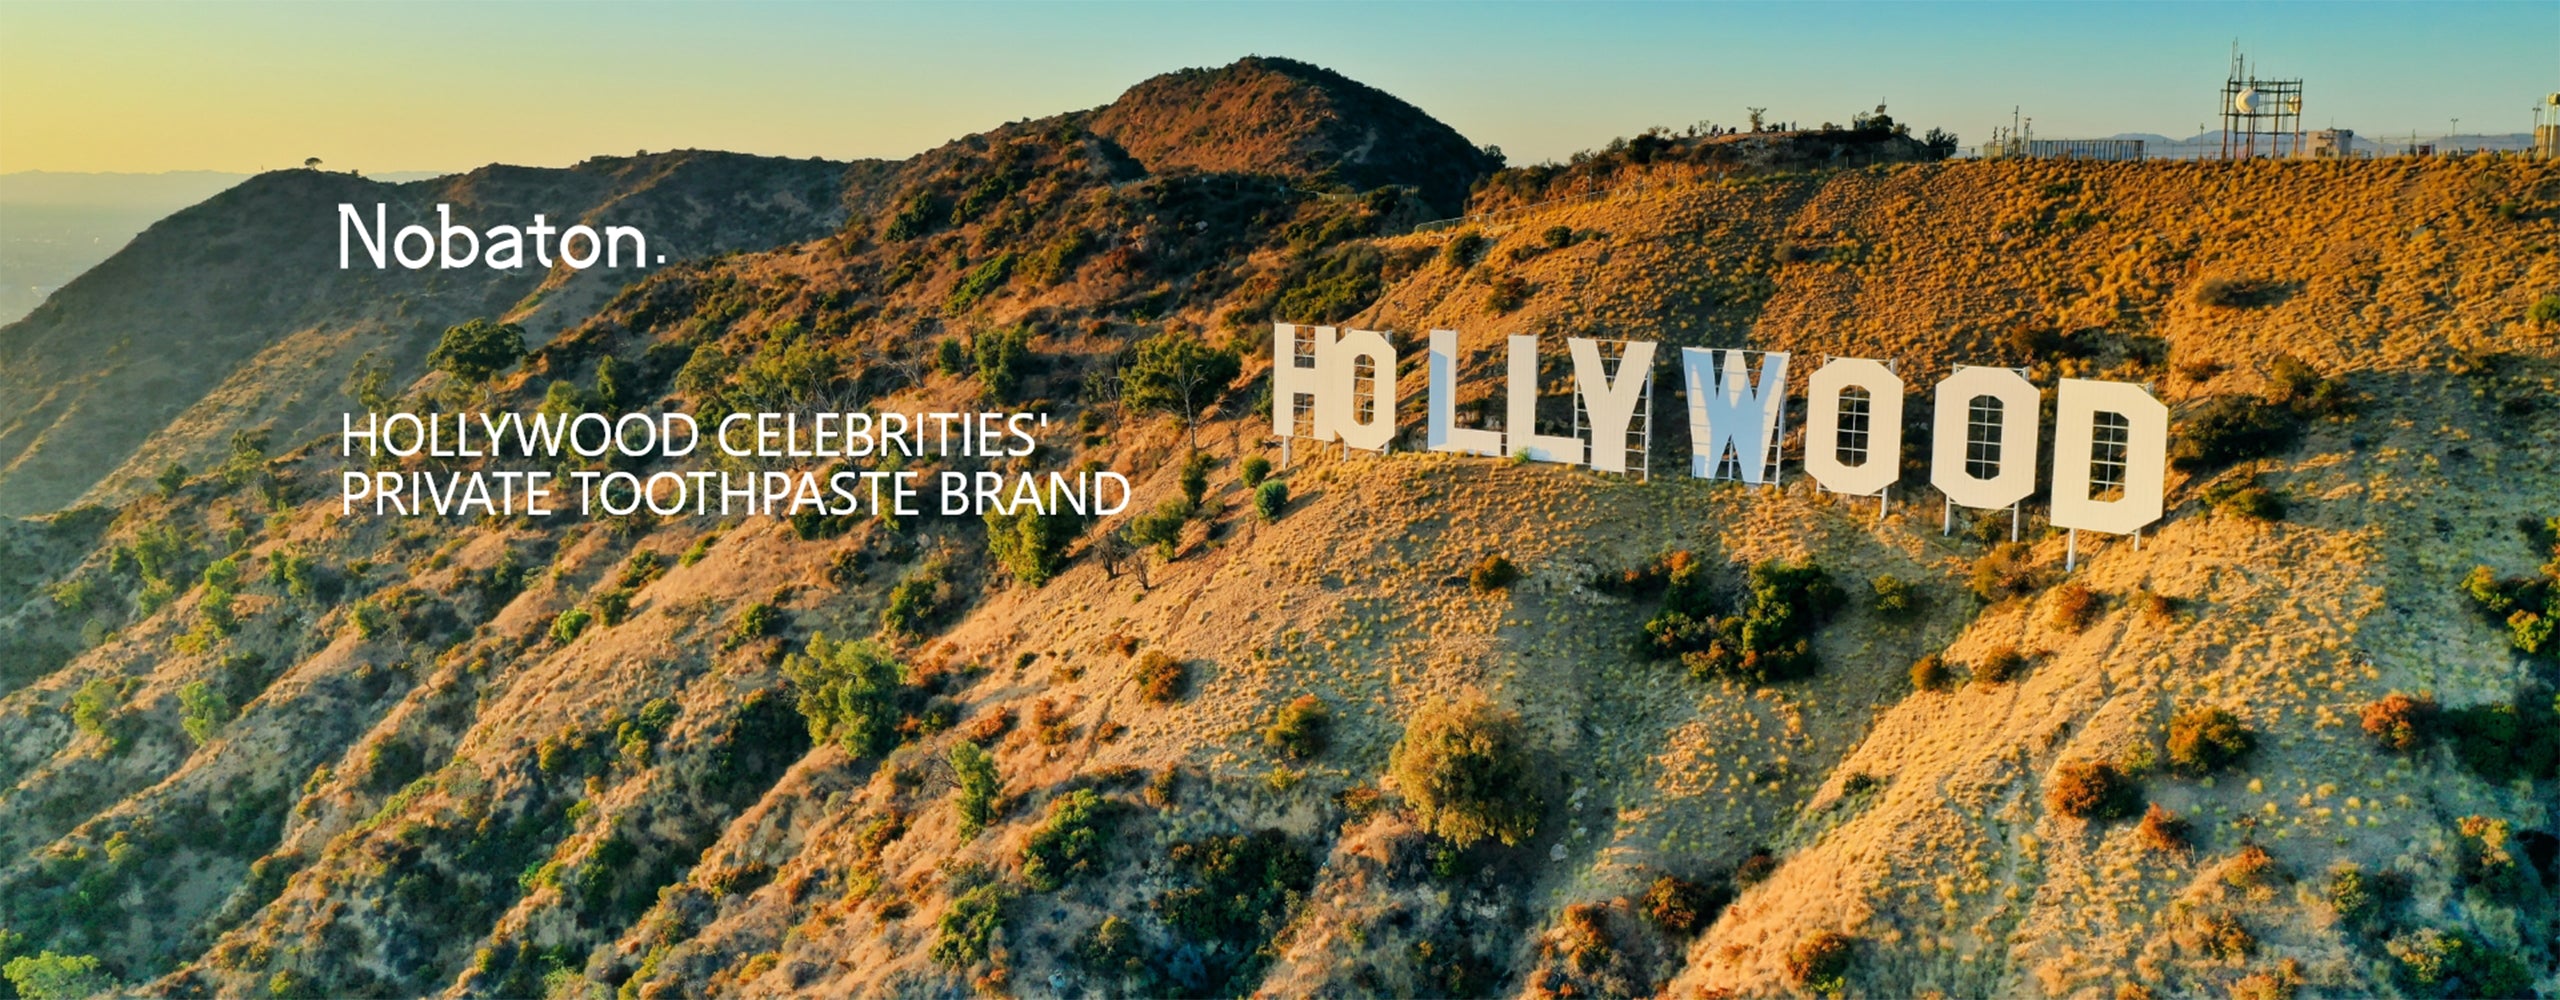 hollywood celebrities' private toothpaste brand